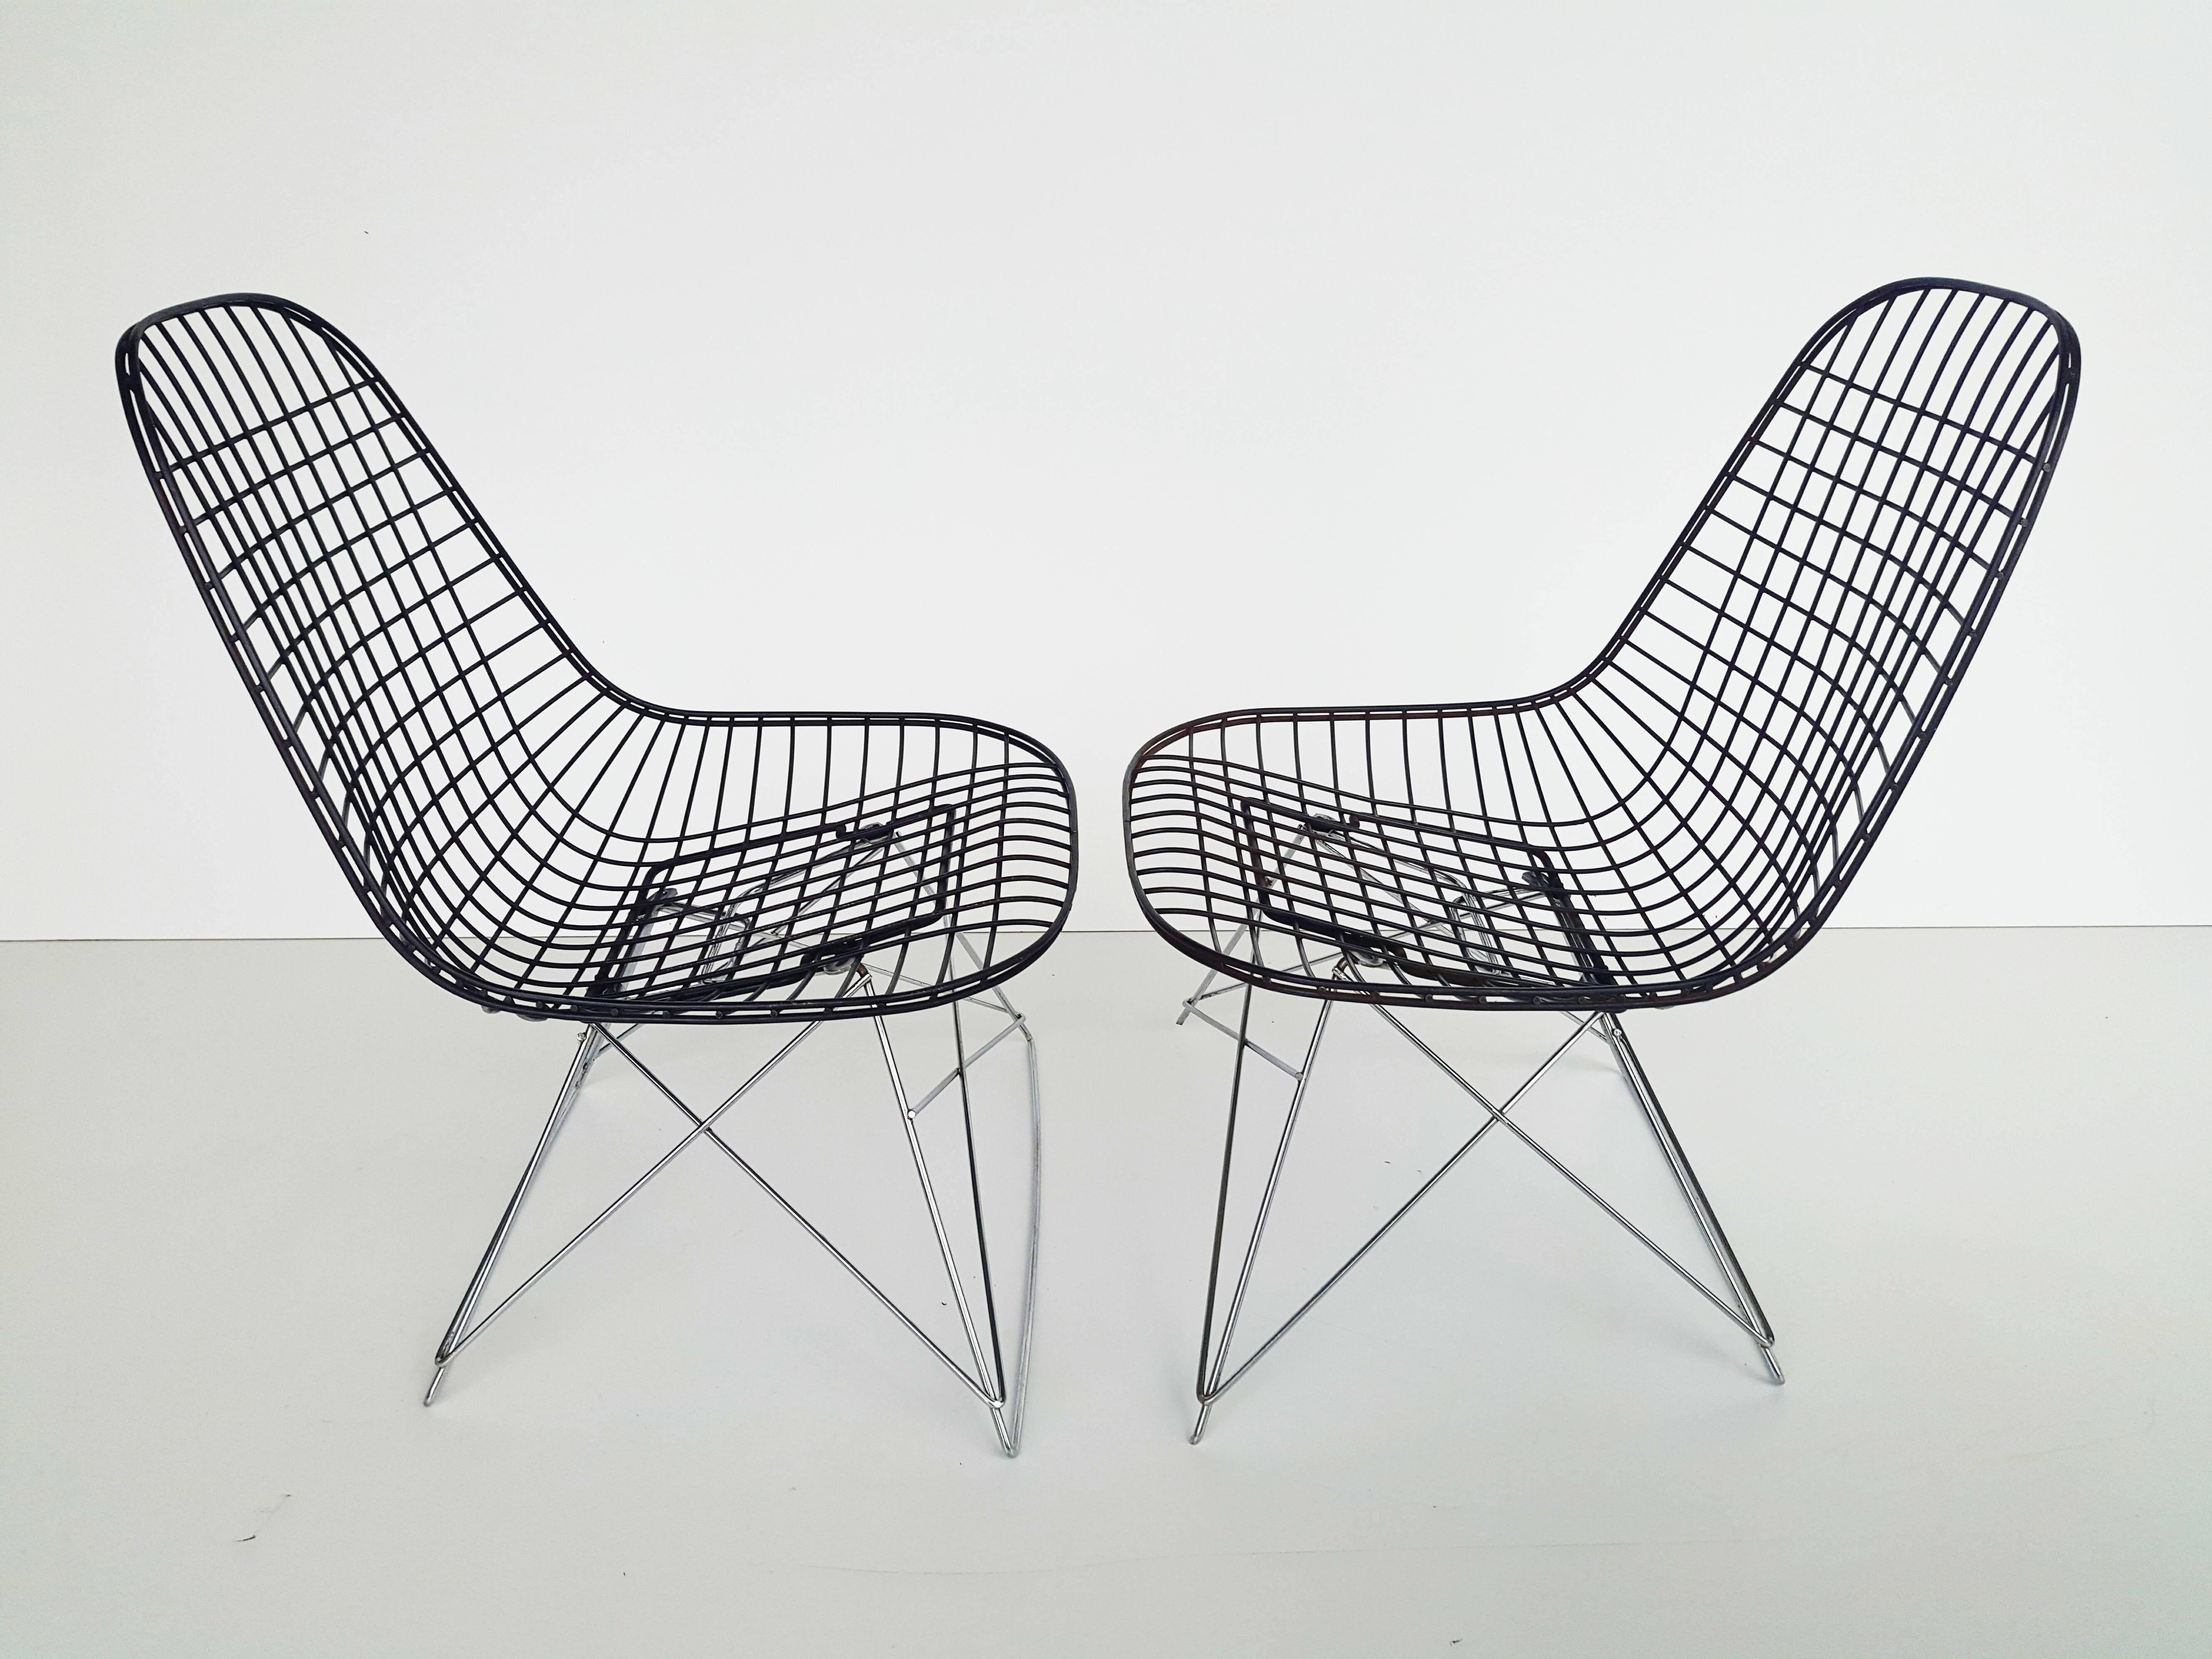 Rare pair of early Charles and Ray Eames LKR-2 lounge chair by Herman Miller, first edition about 1953. A real collector's piece, this early Eames LKR-2 wire lounge chair has a chrome cat's cradle base and original black patina seat. Fine, museum